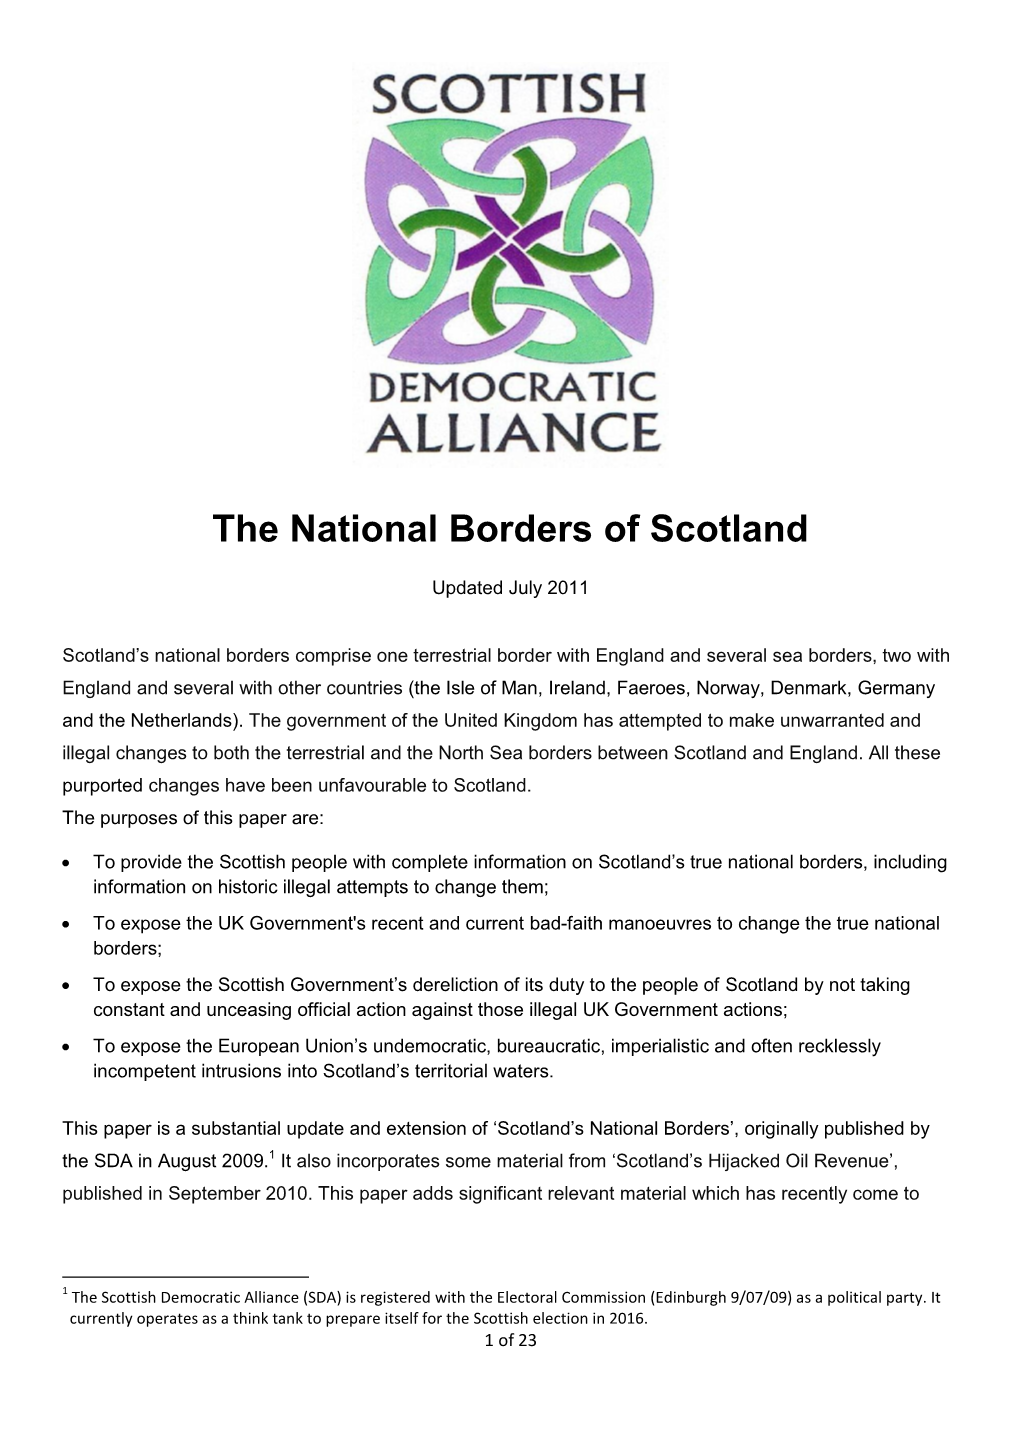 The National Borders of Scotland